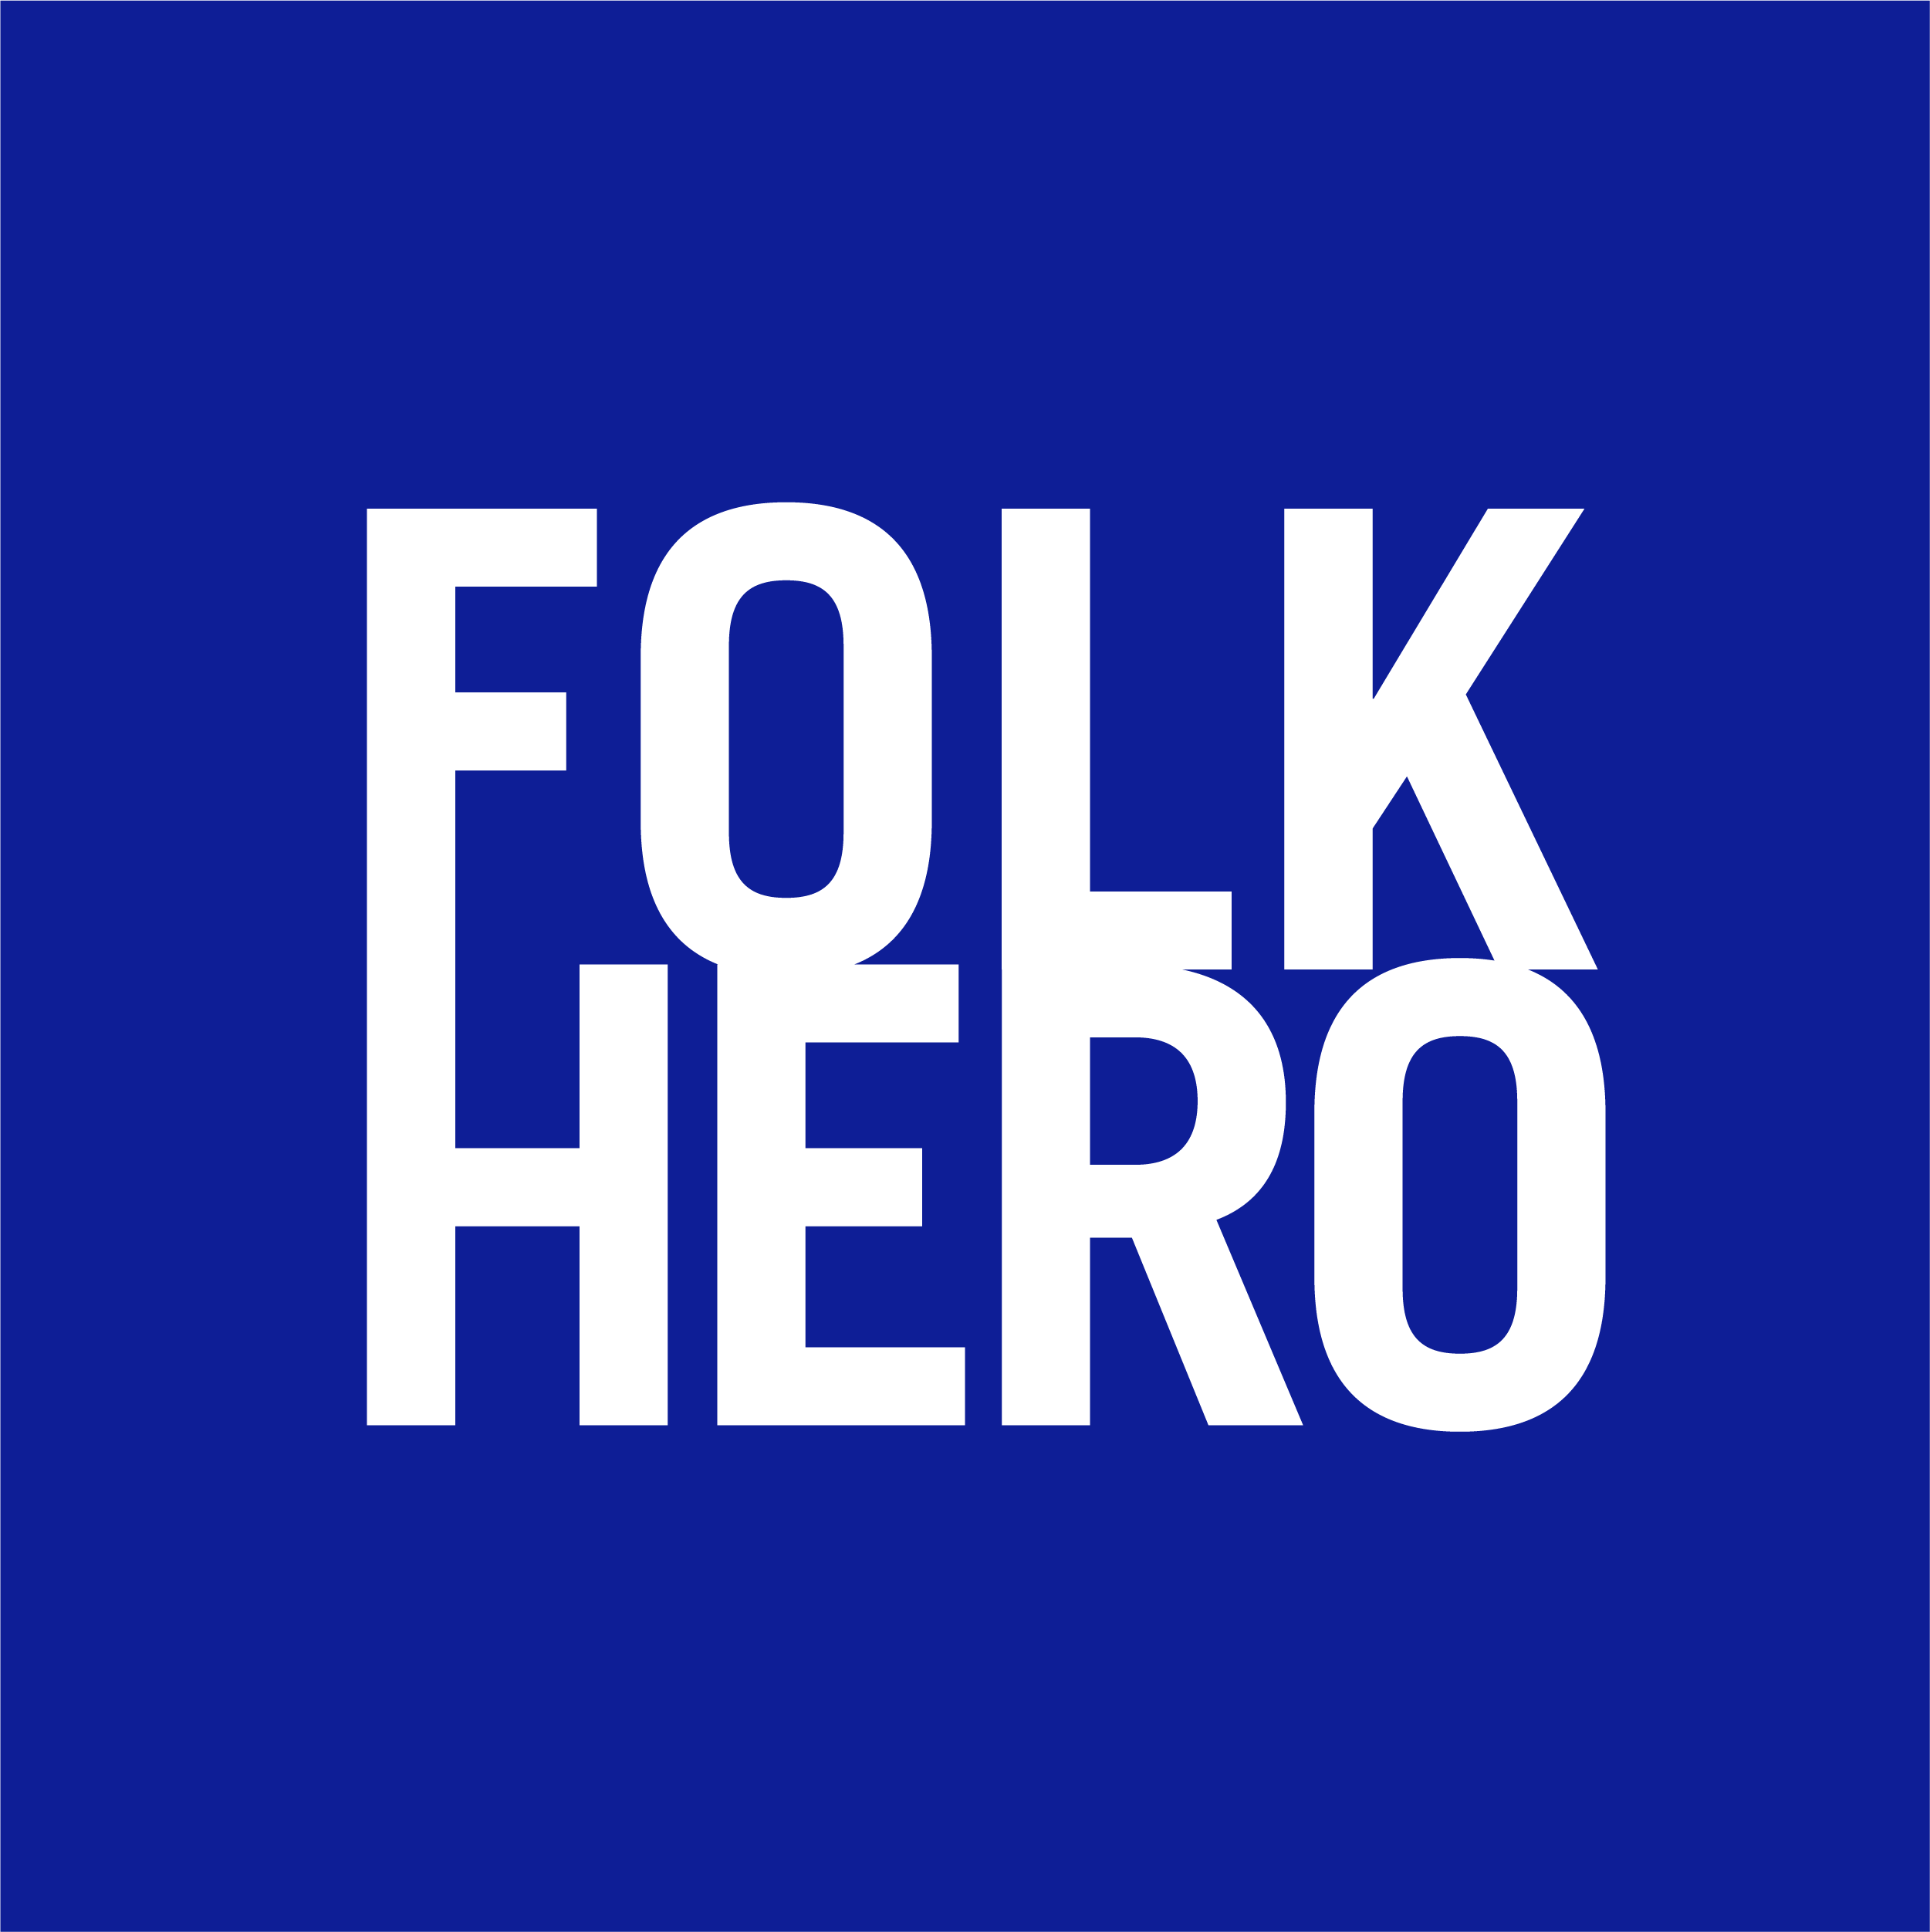 FOLK HERO™ partners with lingerie label INTIMISSIMI to